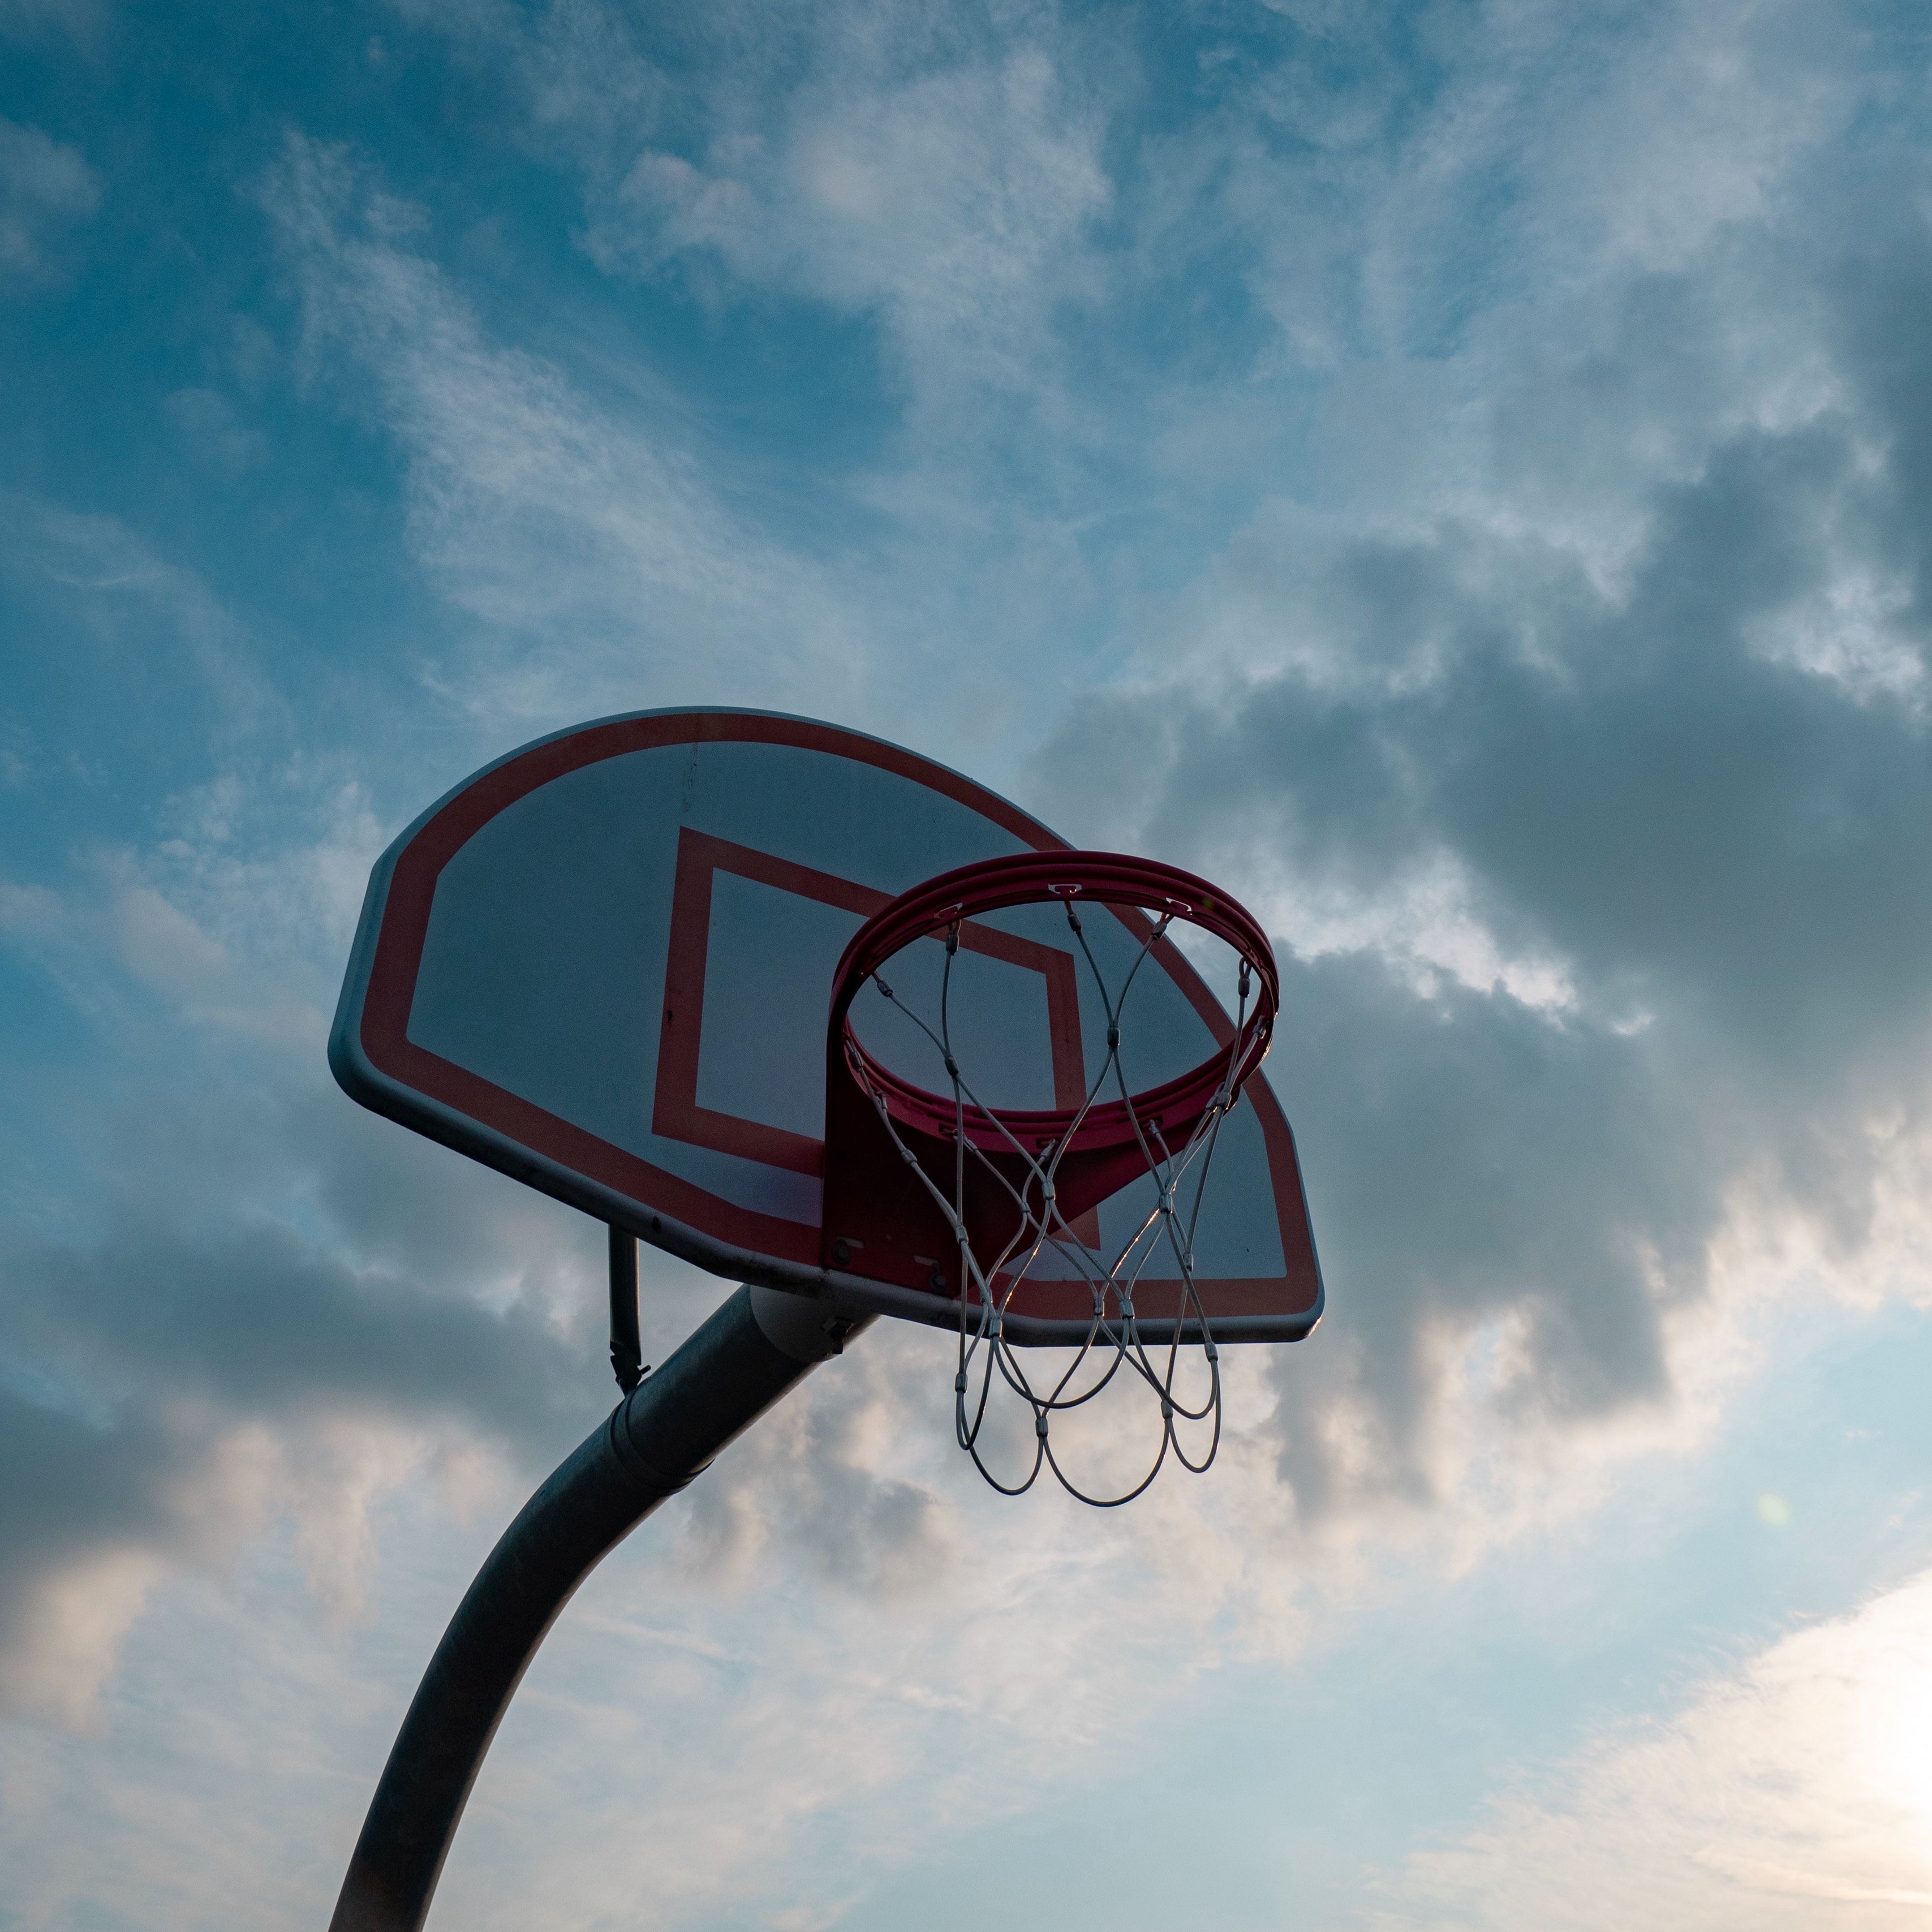 A basketball hoop with the sun shining on it - Basketball